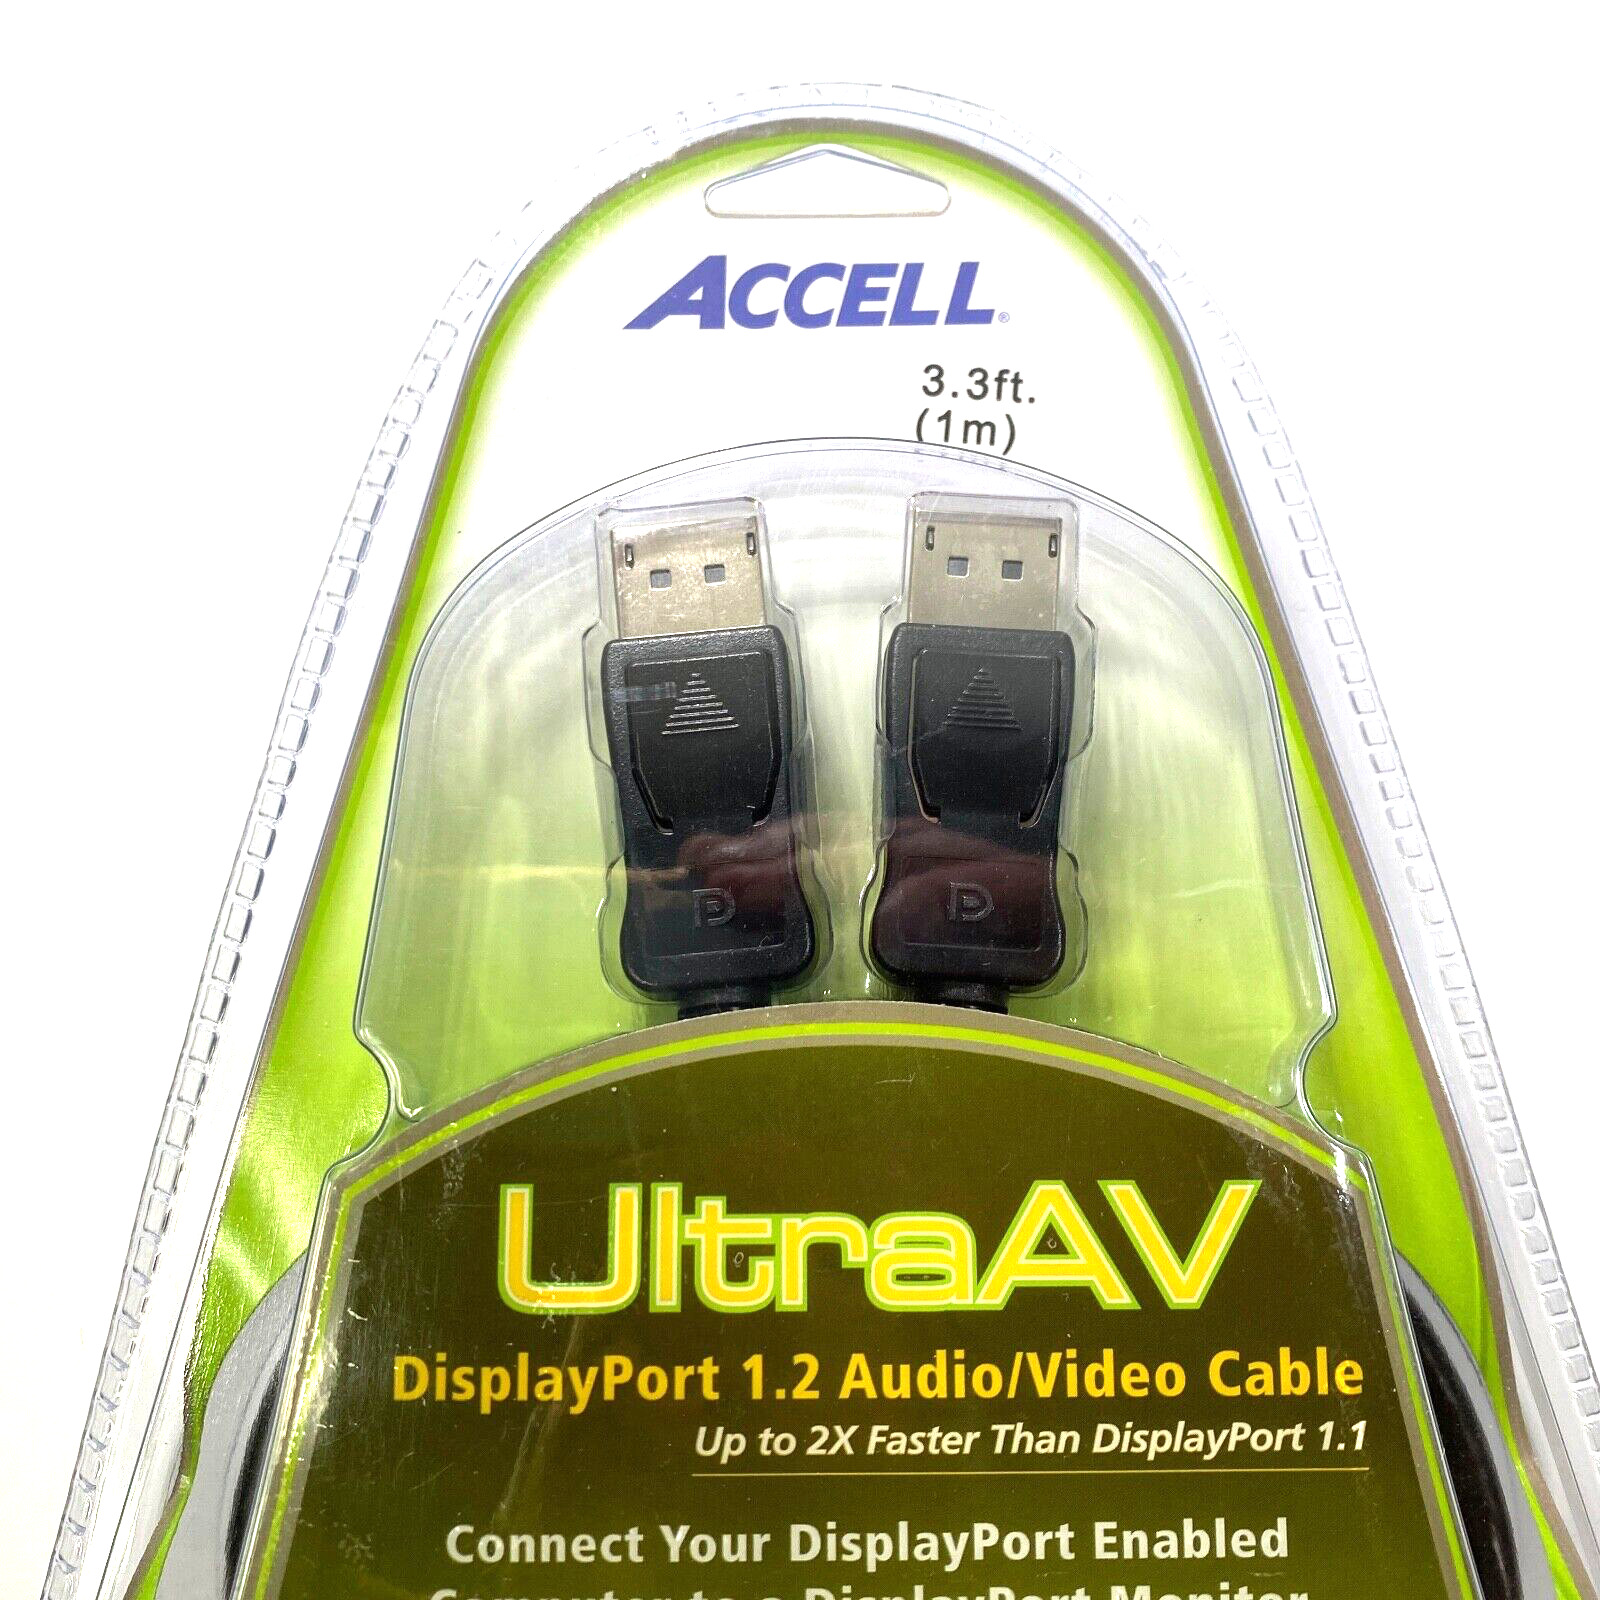 Accell UltraAV DisplayPort 1.2 AudiovVideo Cable 3.3ft. Brand New